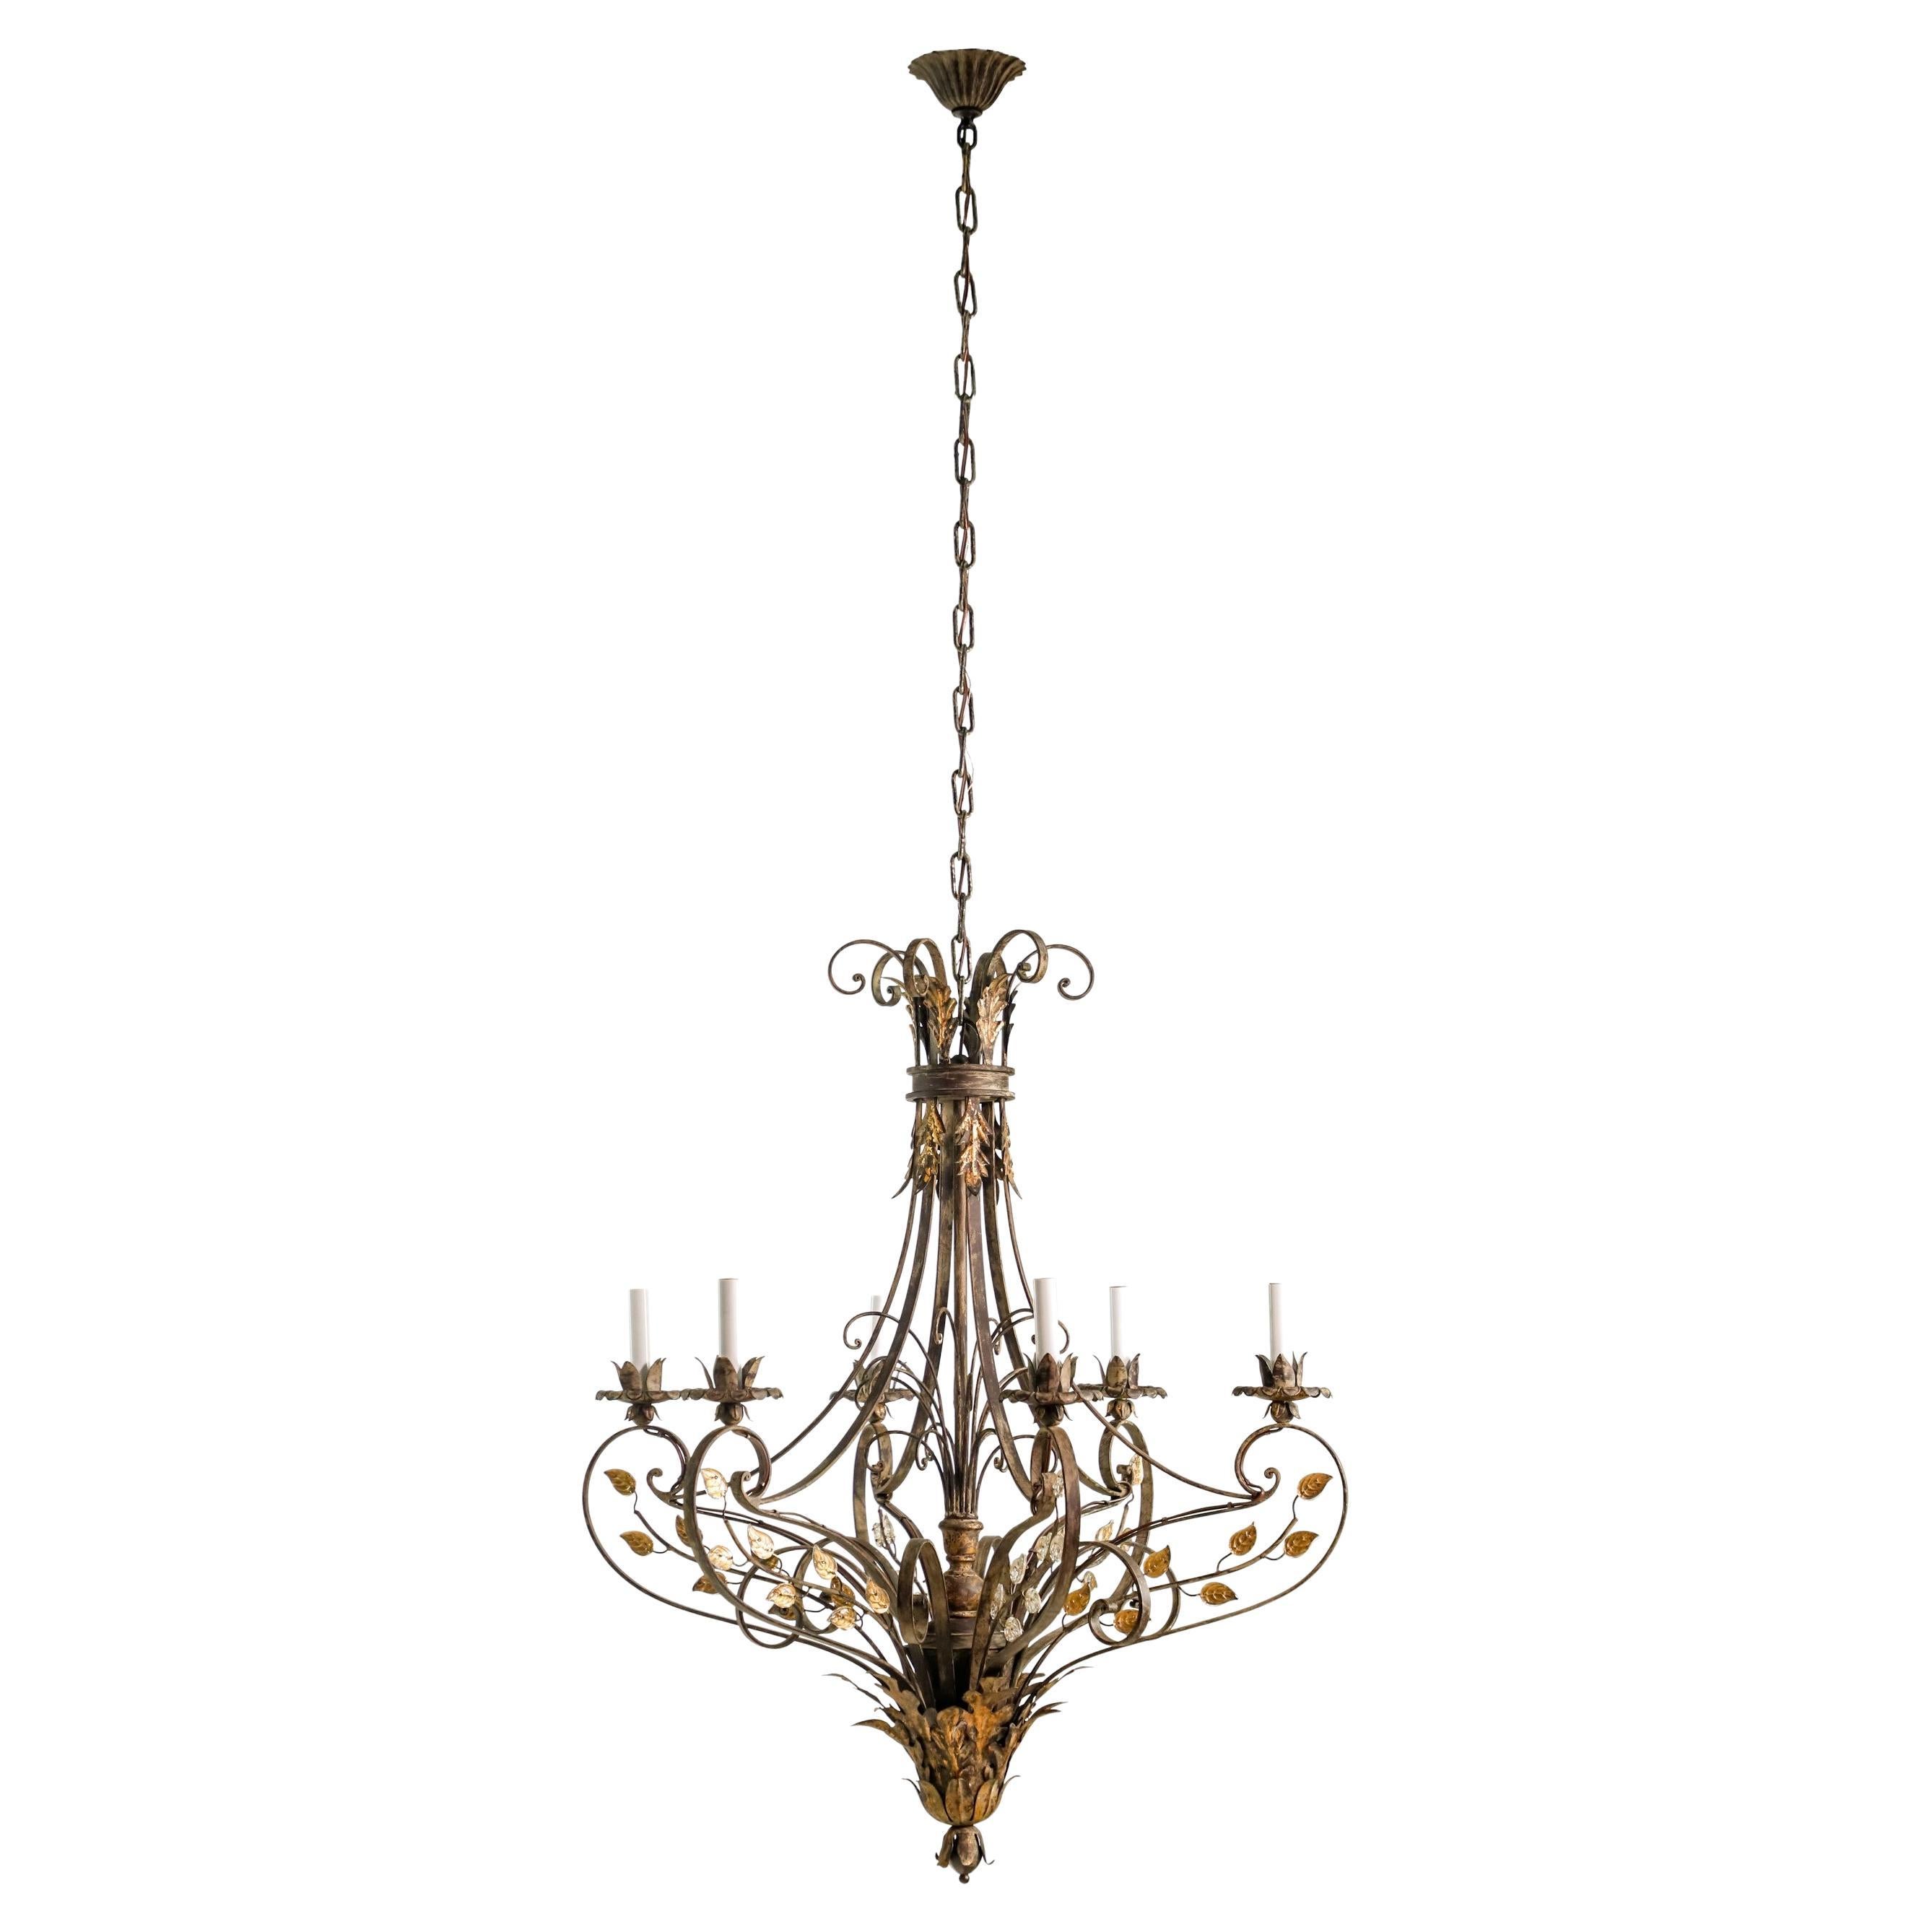 6 Light Gilt Wrought Iron & Crystal Leaves Chandelier For Sale